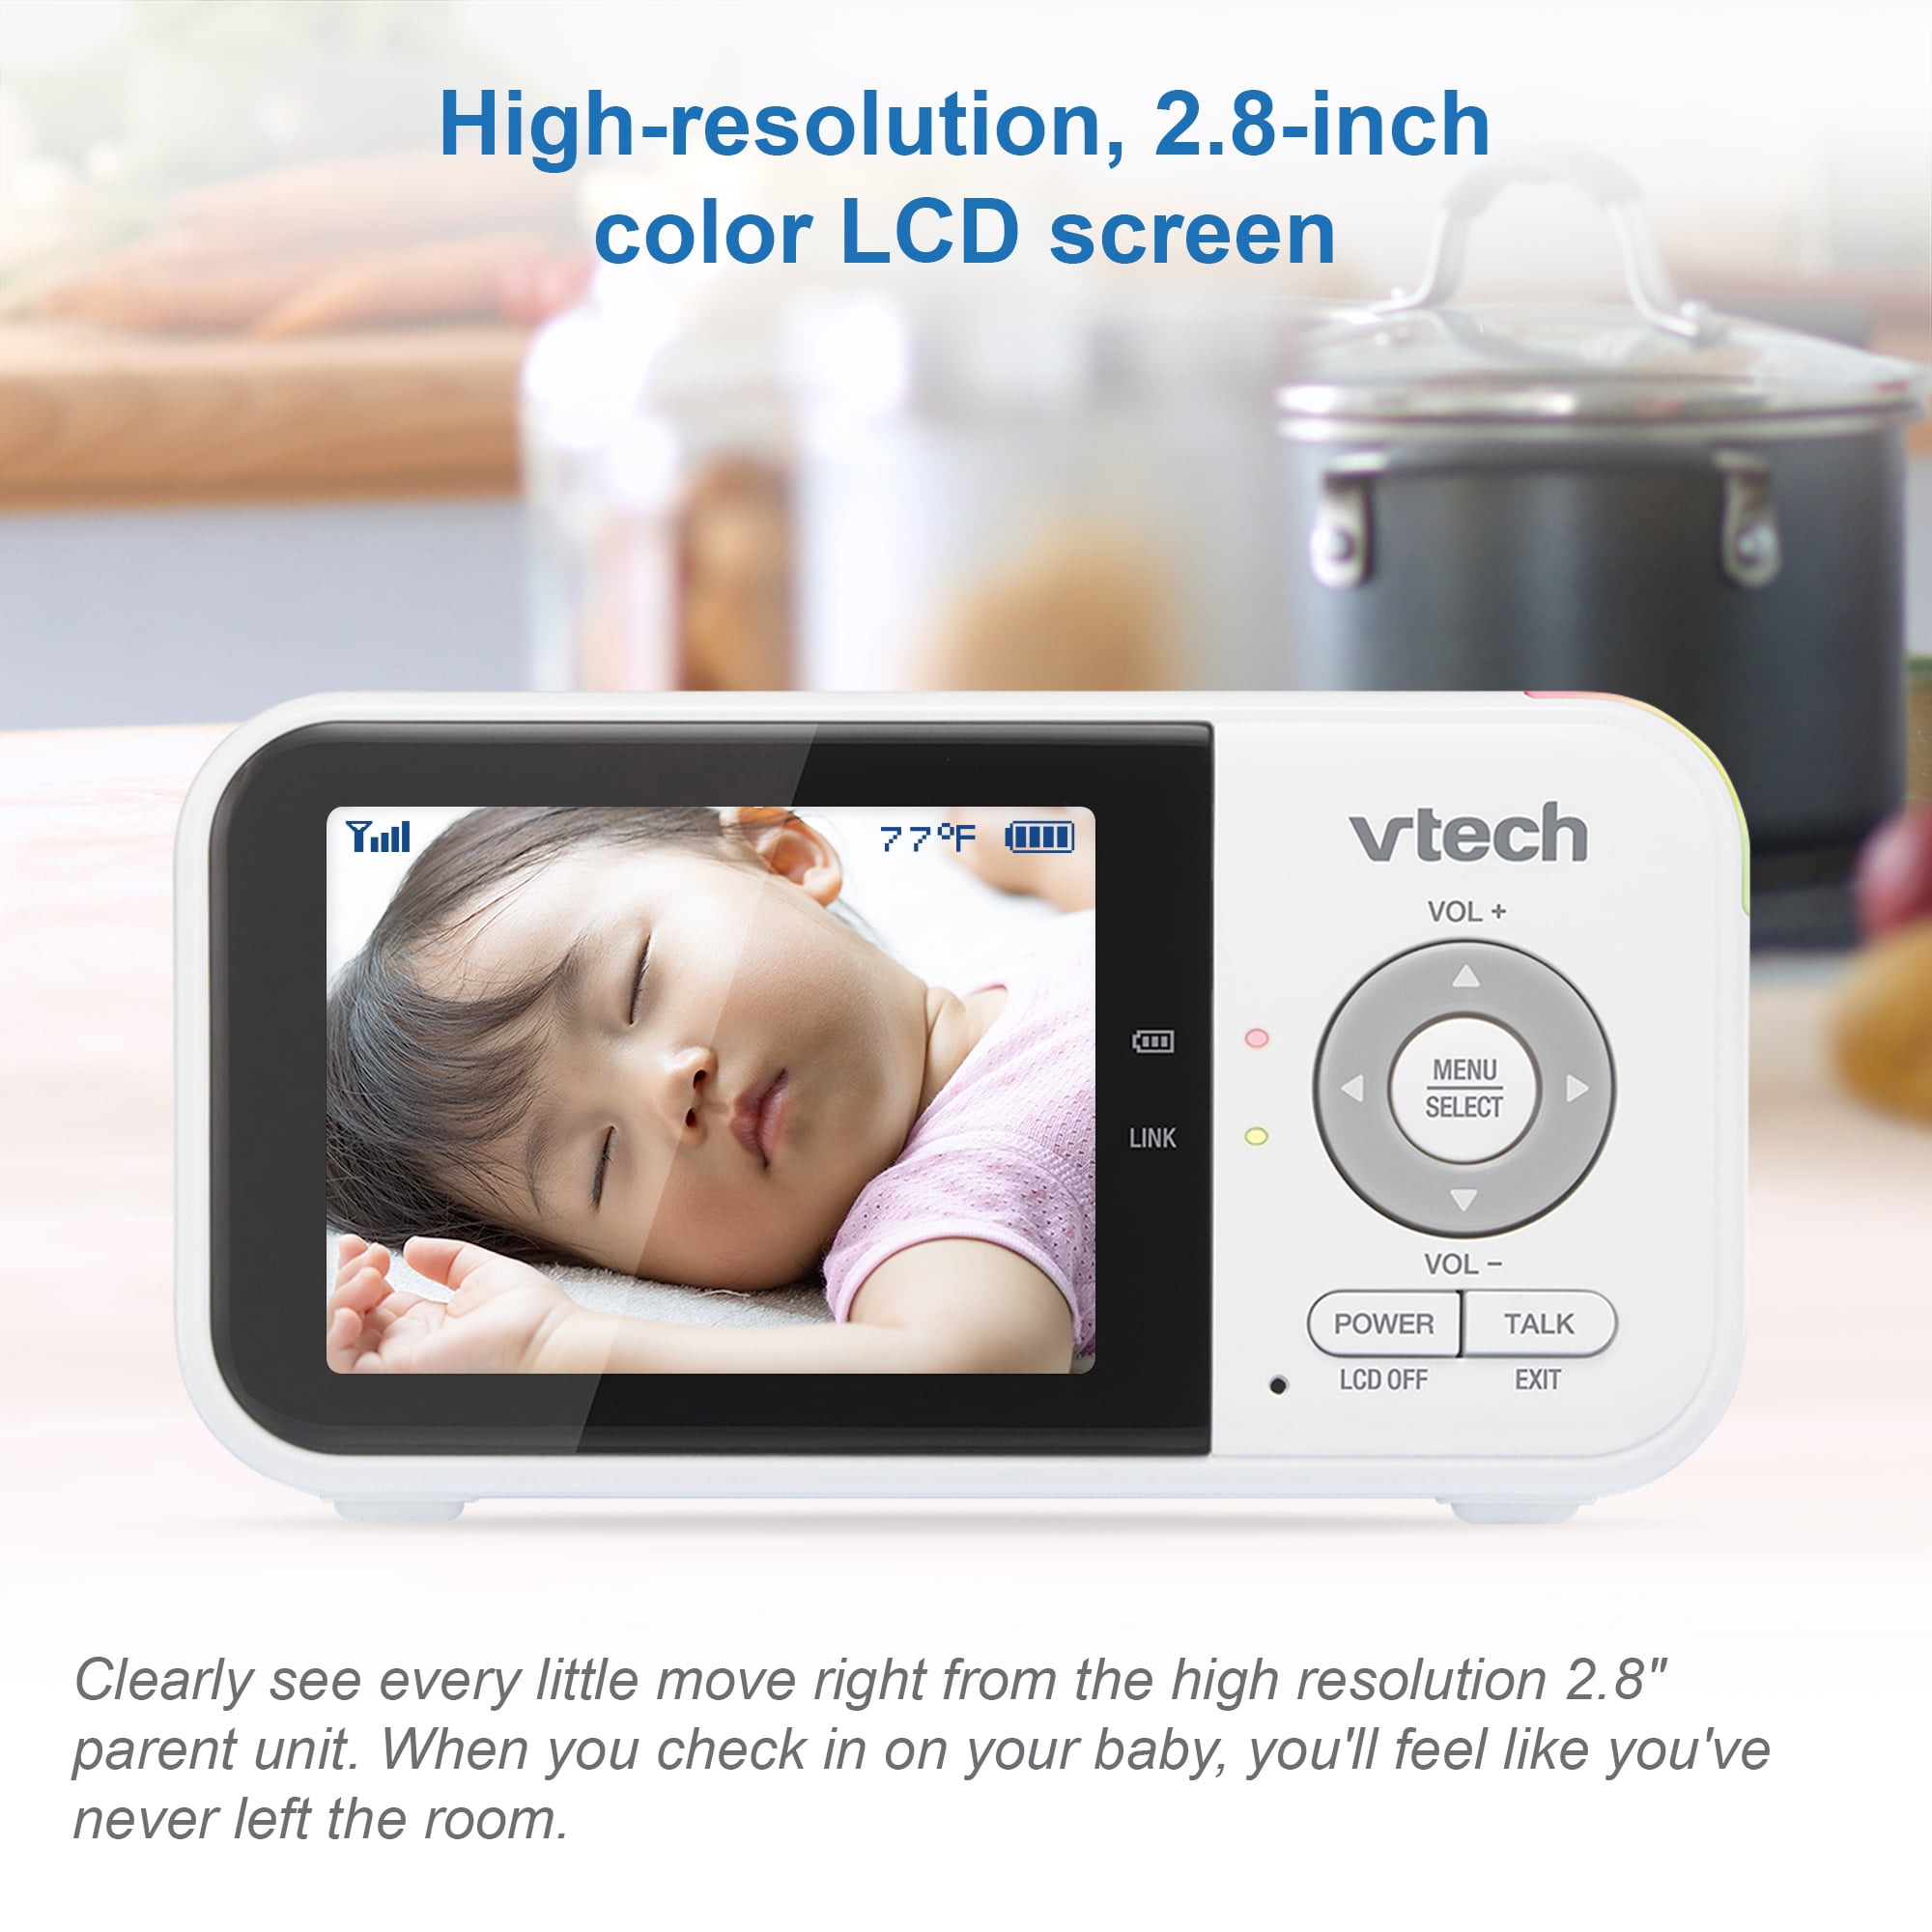 VTech [Upgraded] VM5463-2 Video Baby Monitor 720p 5 LCD with 2 Cameras,  Battery 12 Hrs, Pan Tilt Zoom, Color Night Light, Glow On The Ceiling